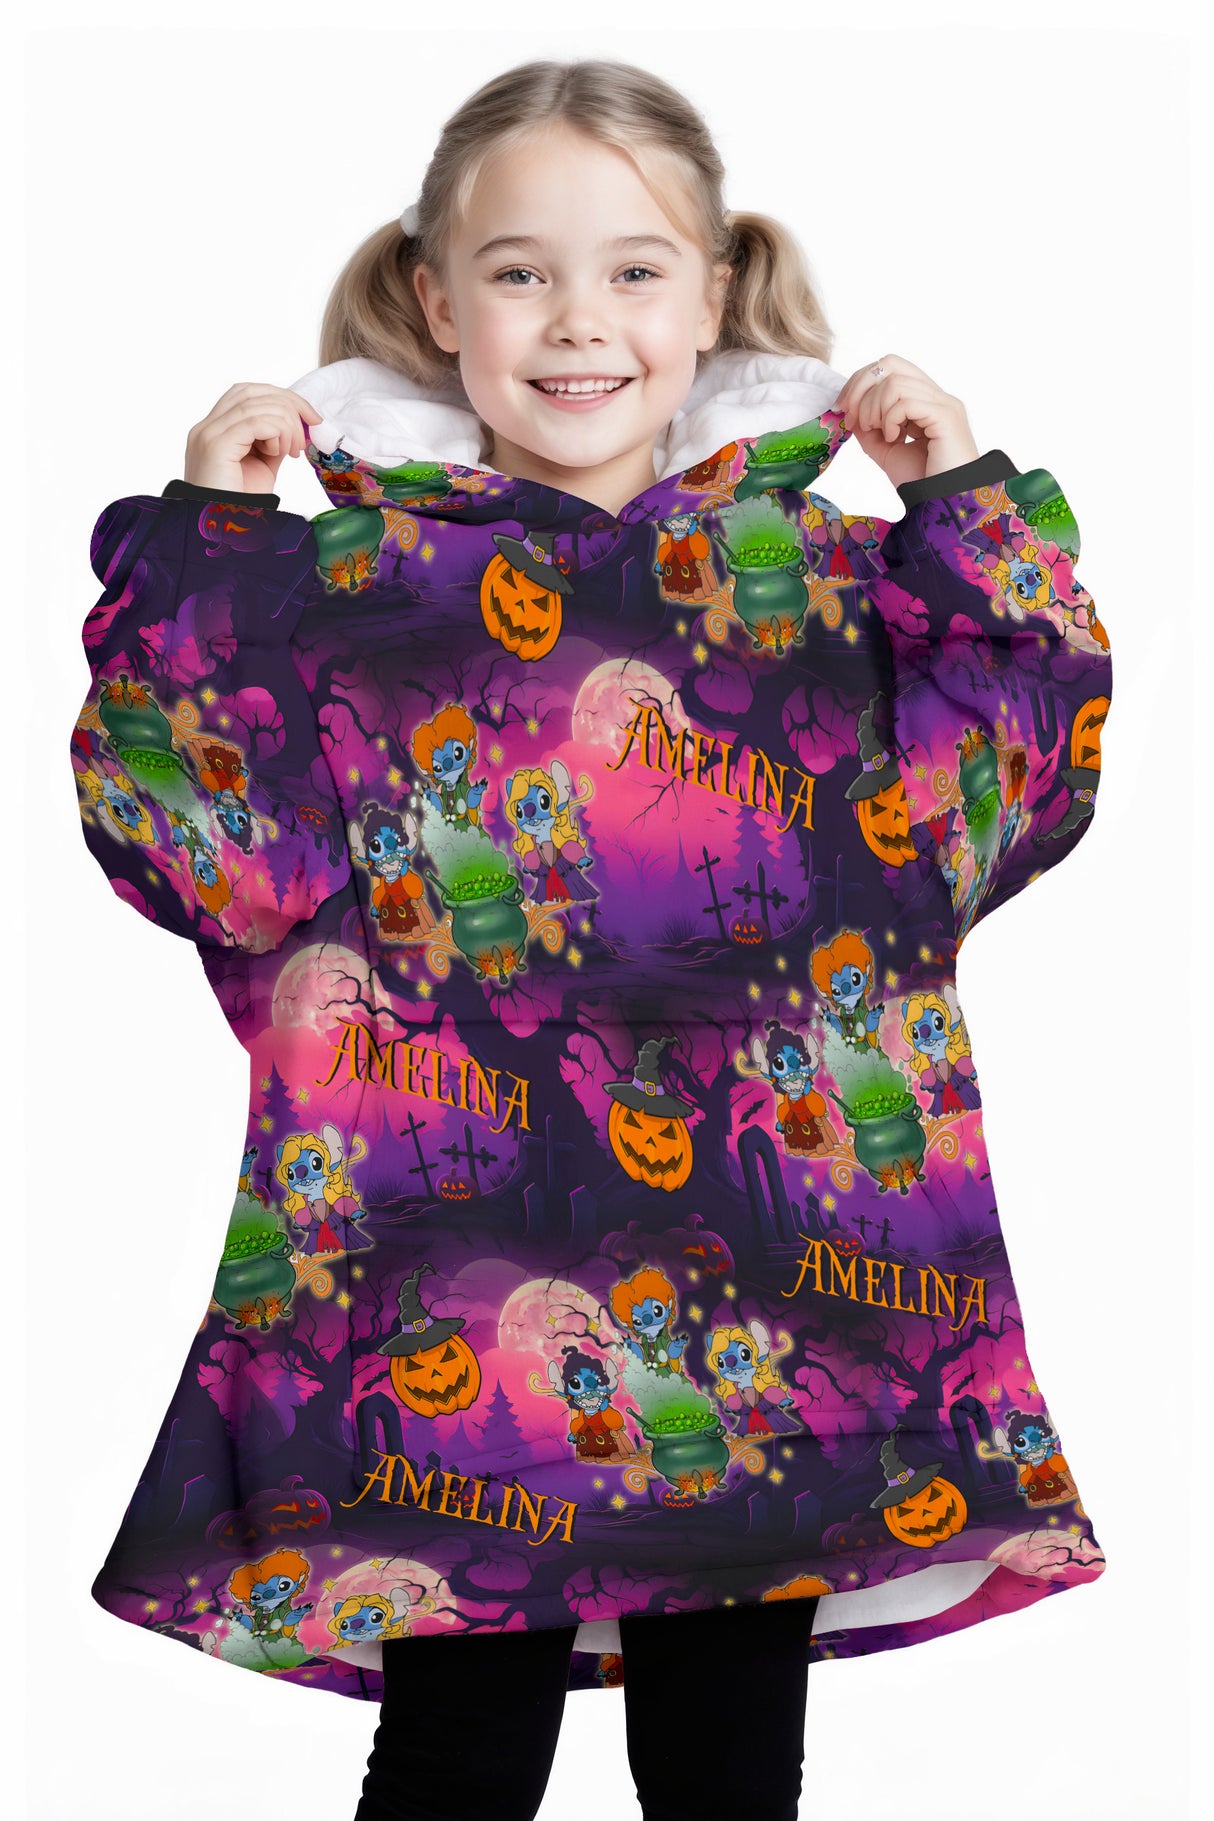 Personalized Snug Sherpa Oversized Wearable Sister Witches Halloween Horror Film Hoodie Blanket